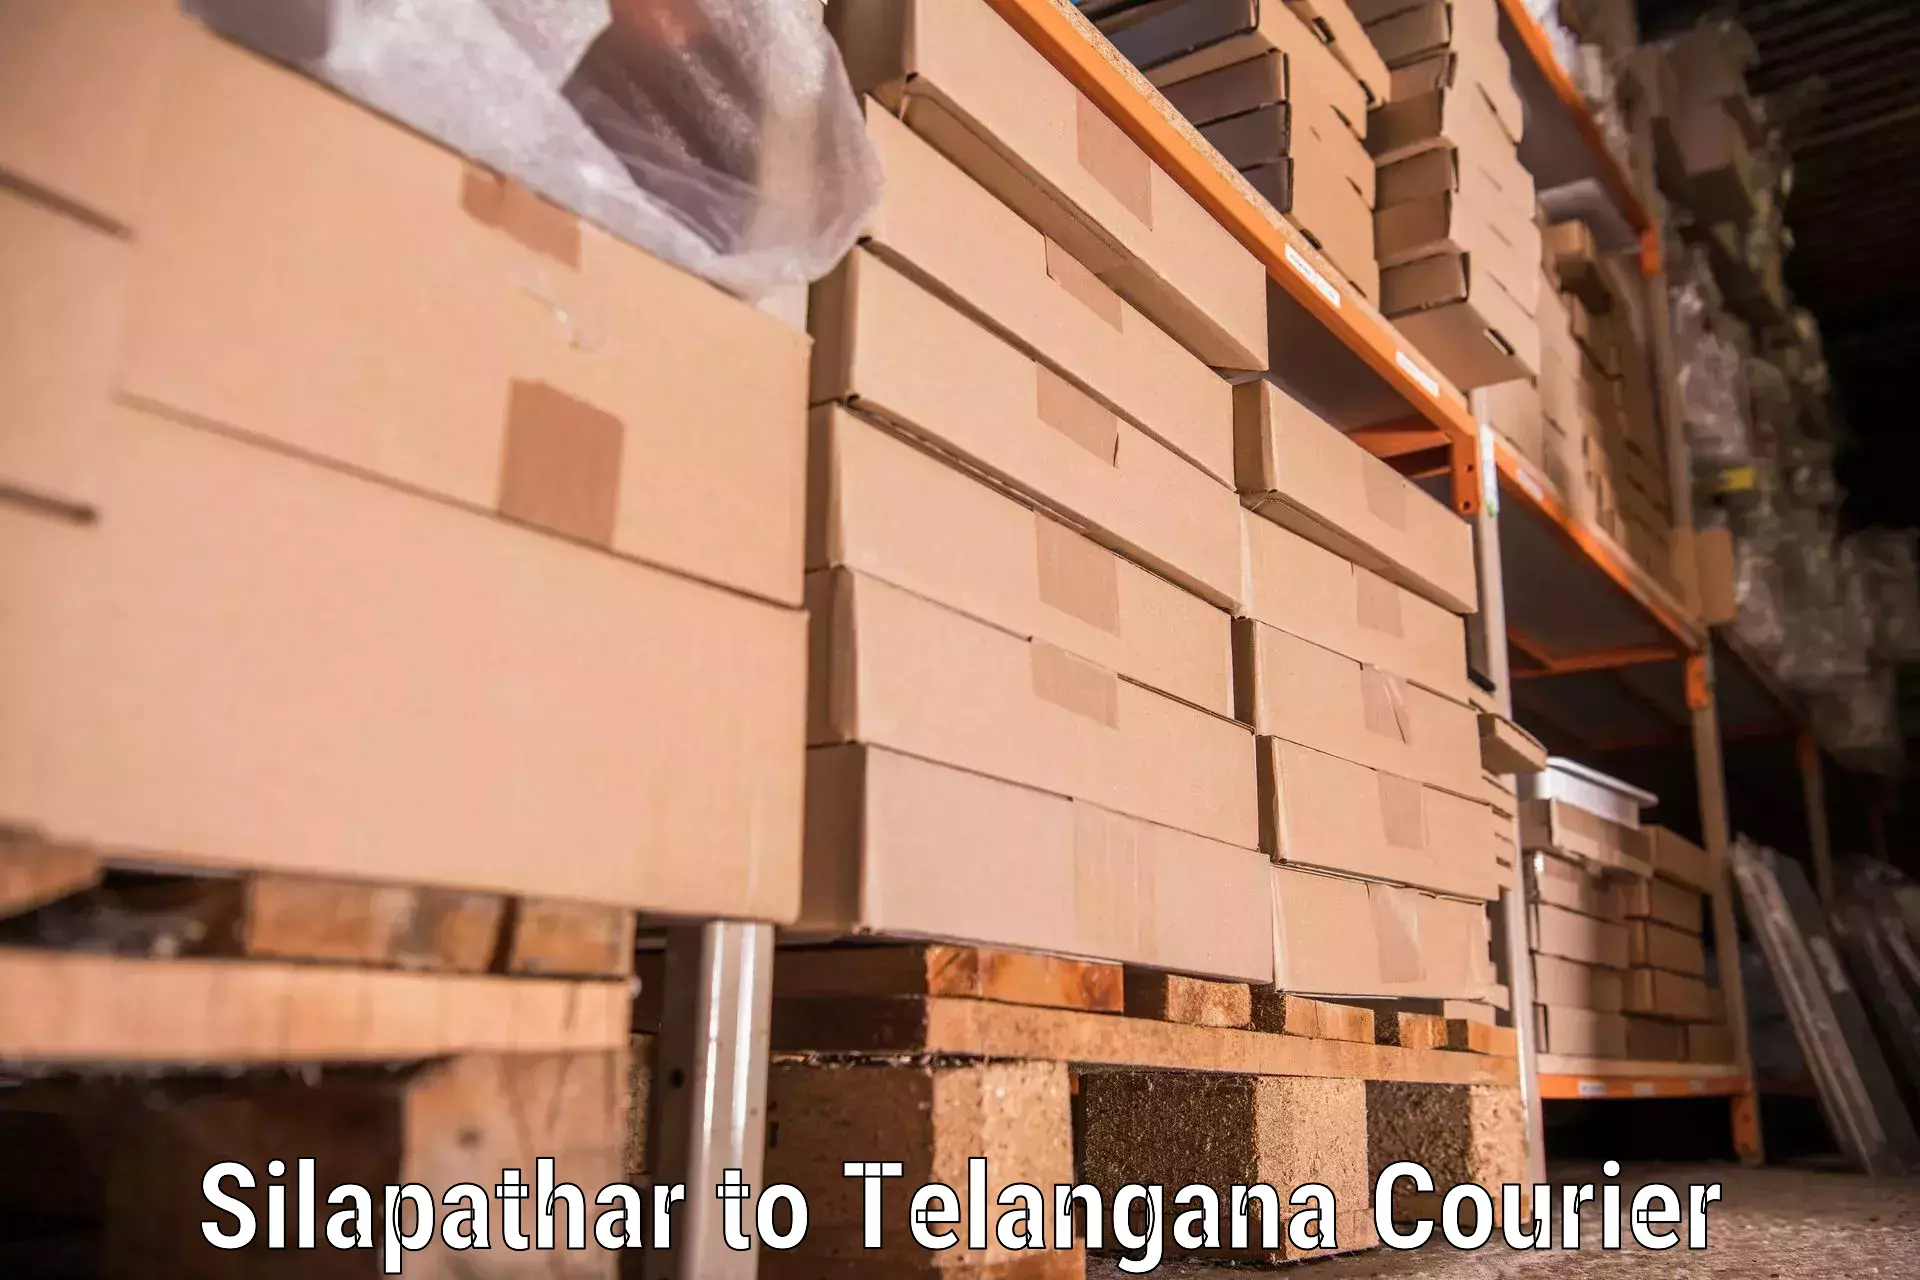 Residential relocation services Silapathar to Bejjanki